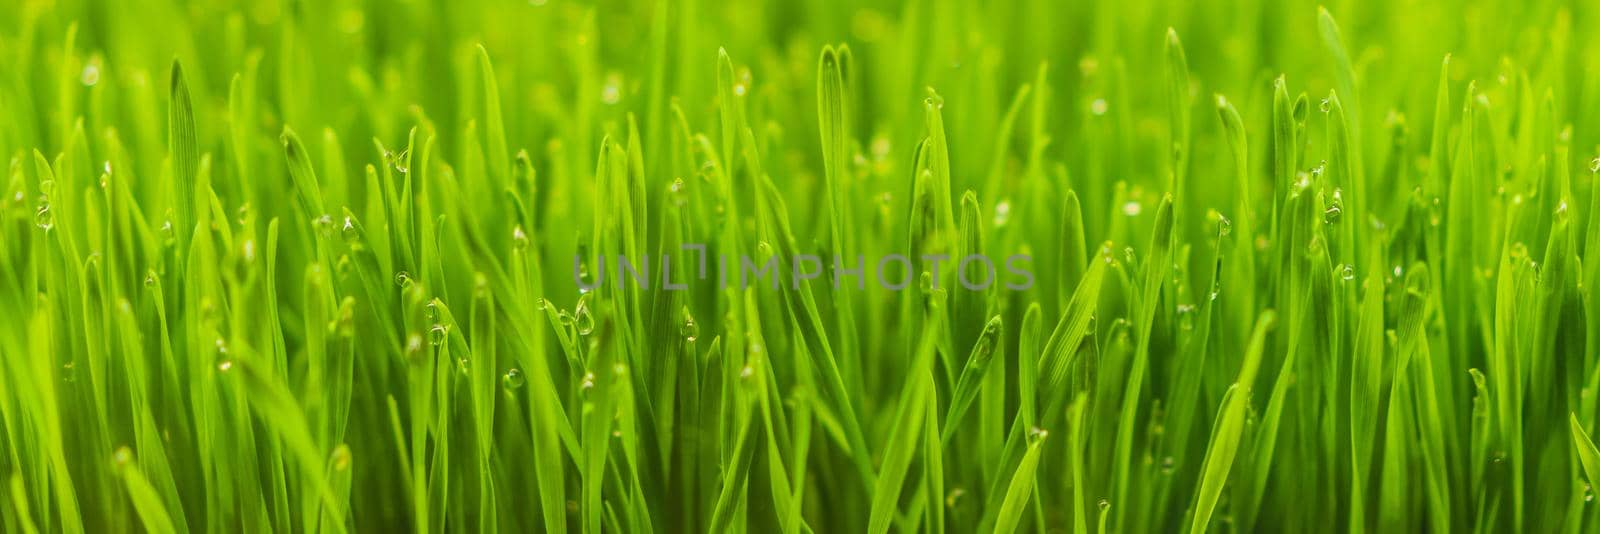 Fresh Wheatgrass plant organic for squeeze juice, Nutritious homegrown Wheatgrass, green wheat sprouts for juice. BANNER, LONG FORMAT